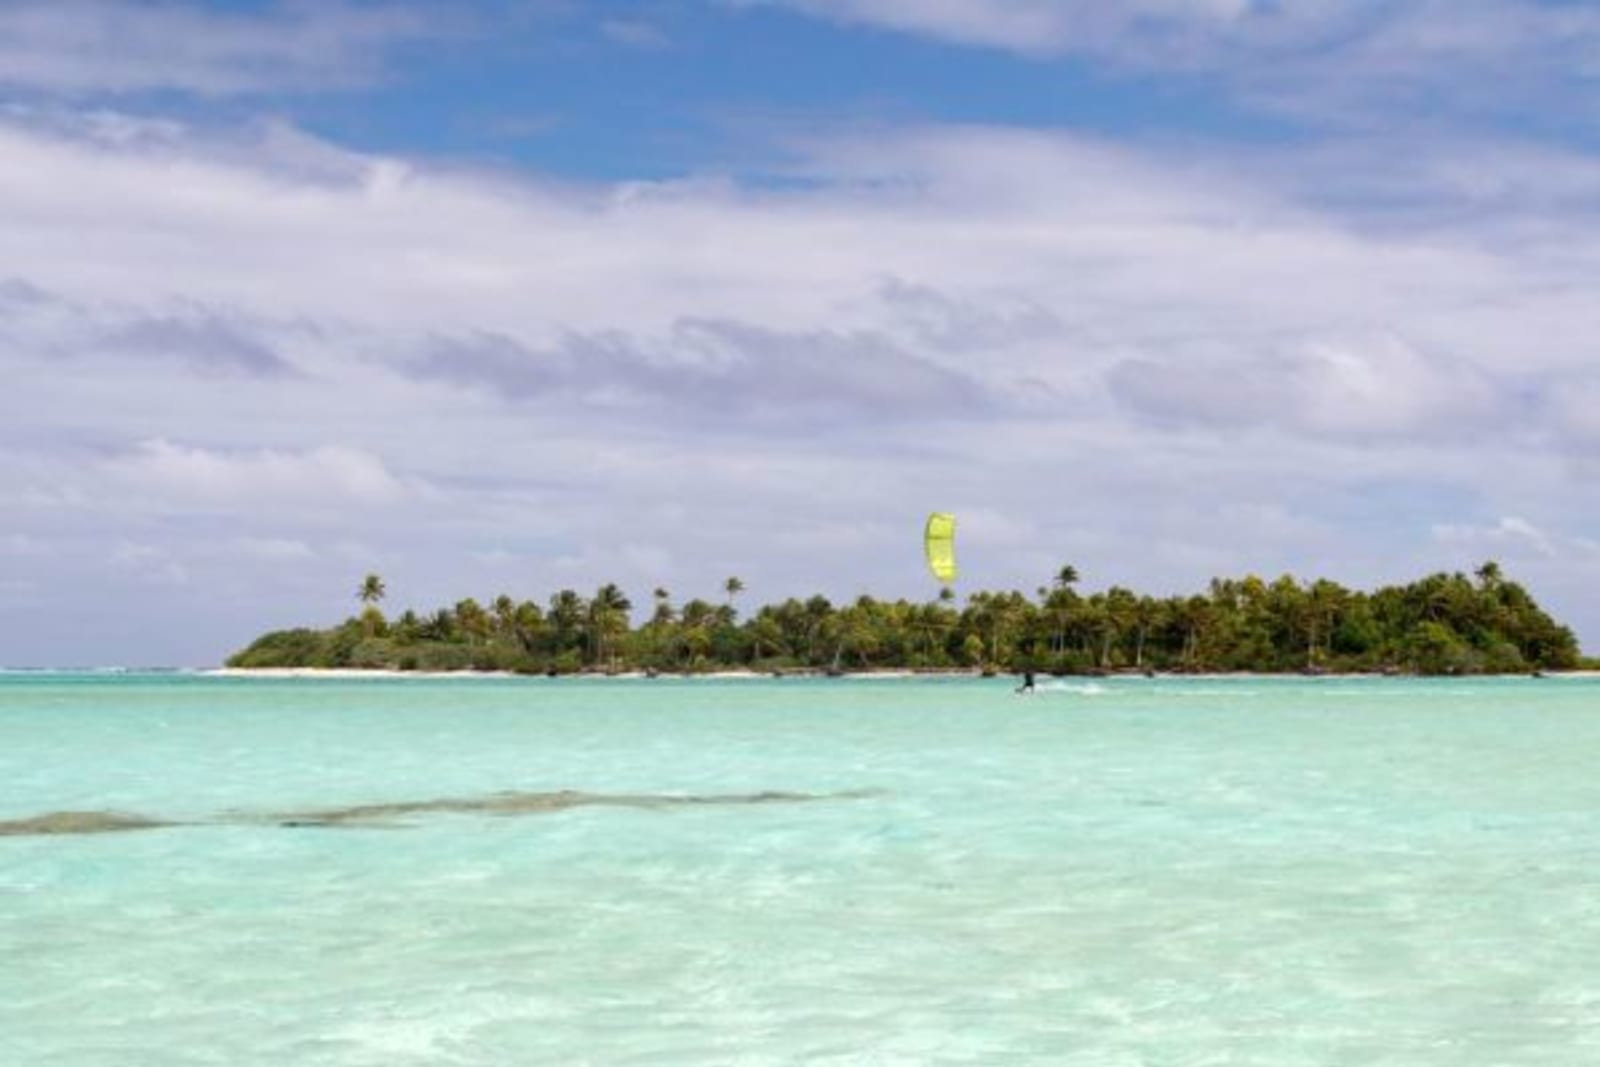 Kite surfer in background surfing clear waters in the Cook Islands